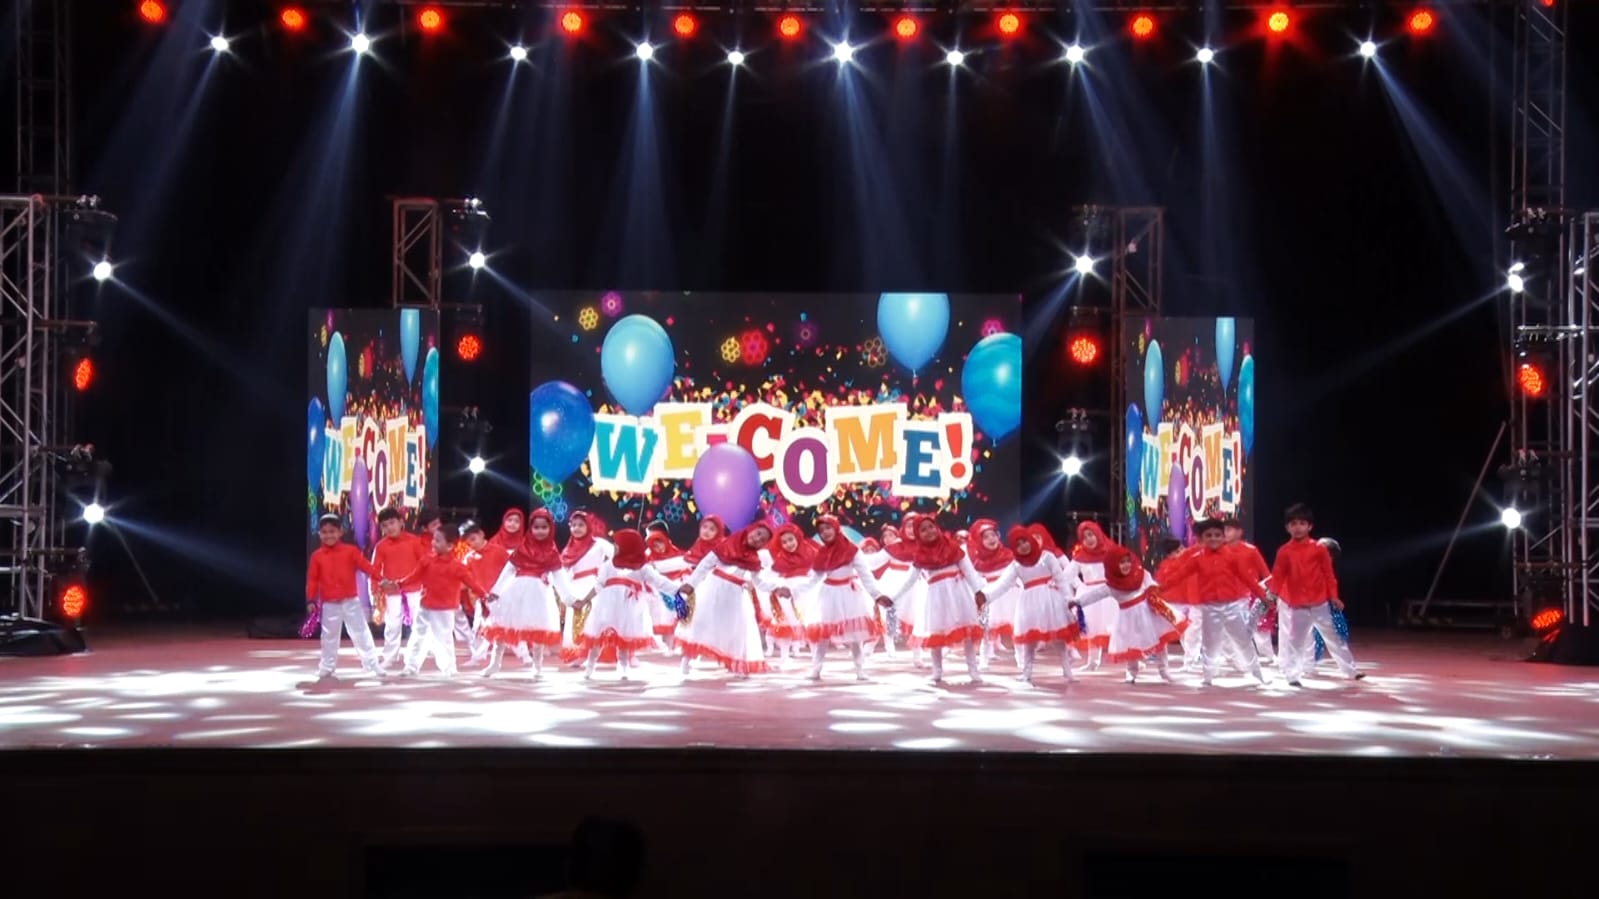 Al-Asr Academia celebrates 6th annual event, presents a kaleidoscopic spectacle in Bhopal